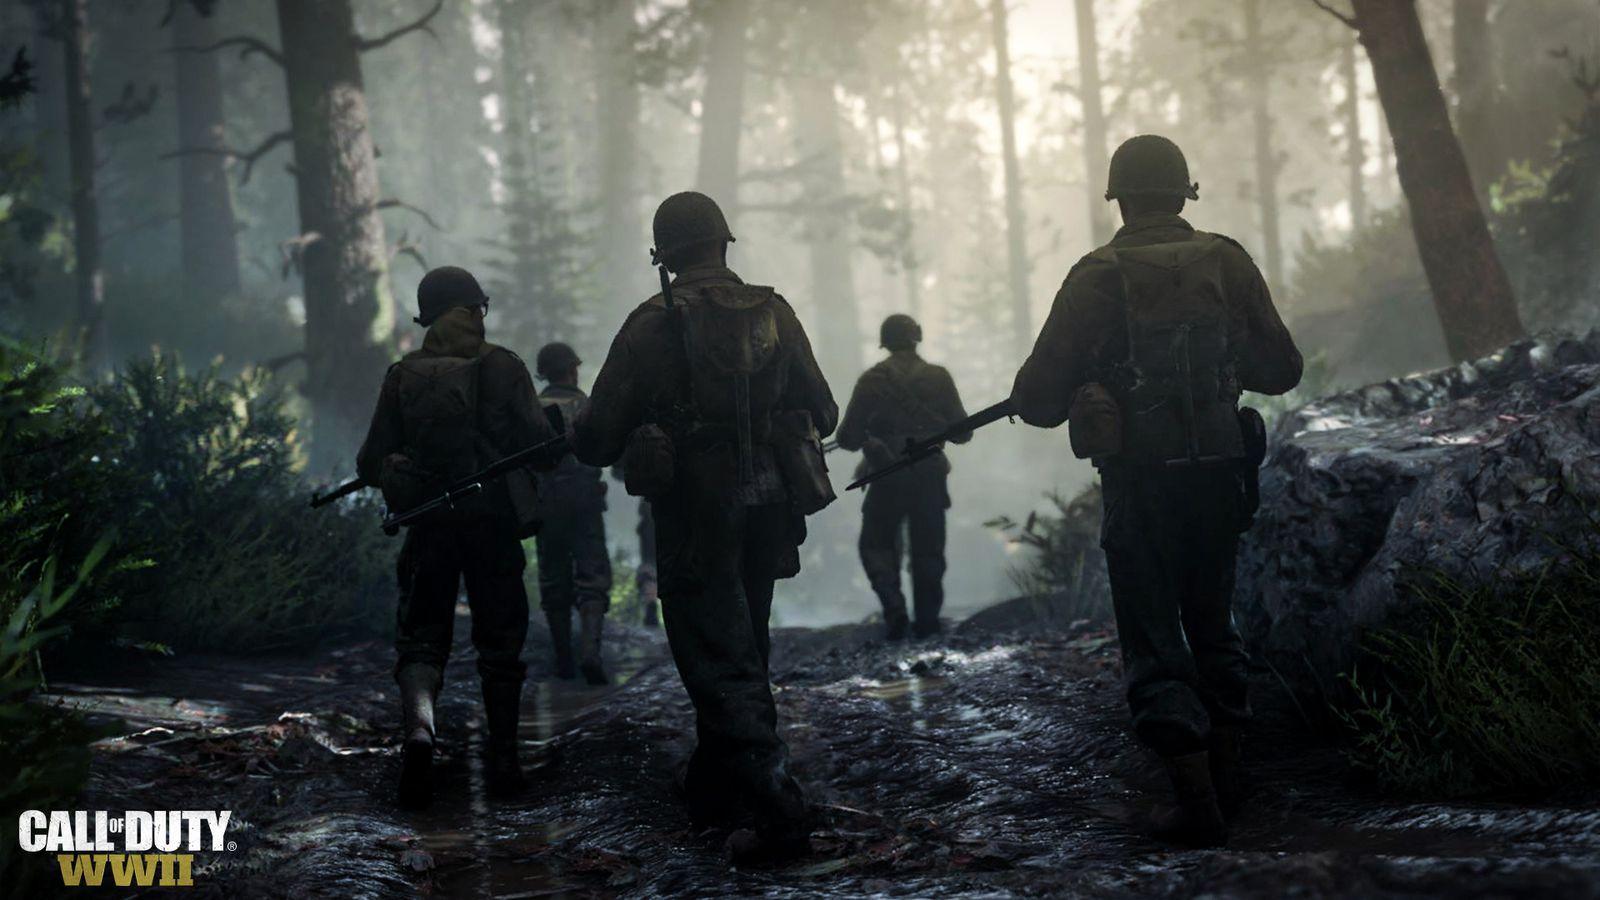 Call of Duty is missing what makes WWII stories so timeless and powerful